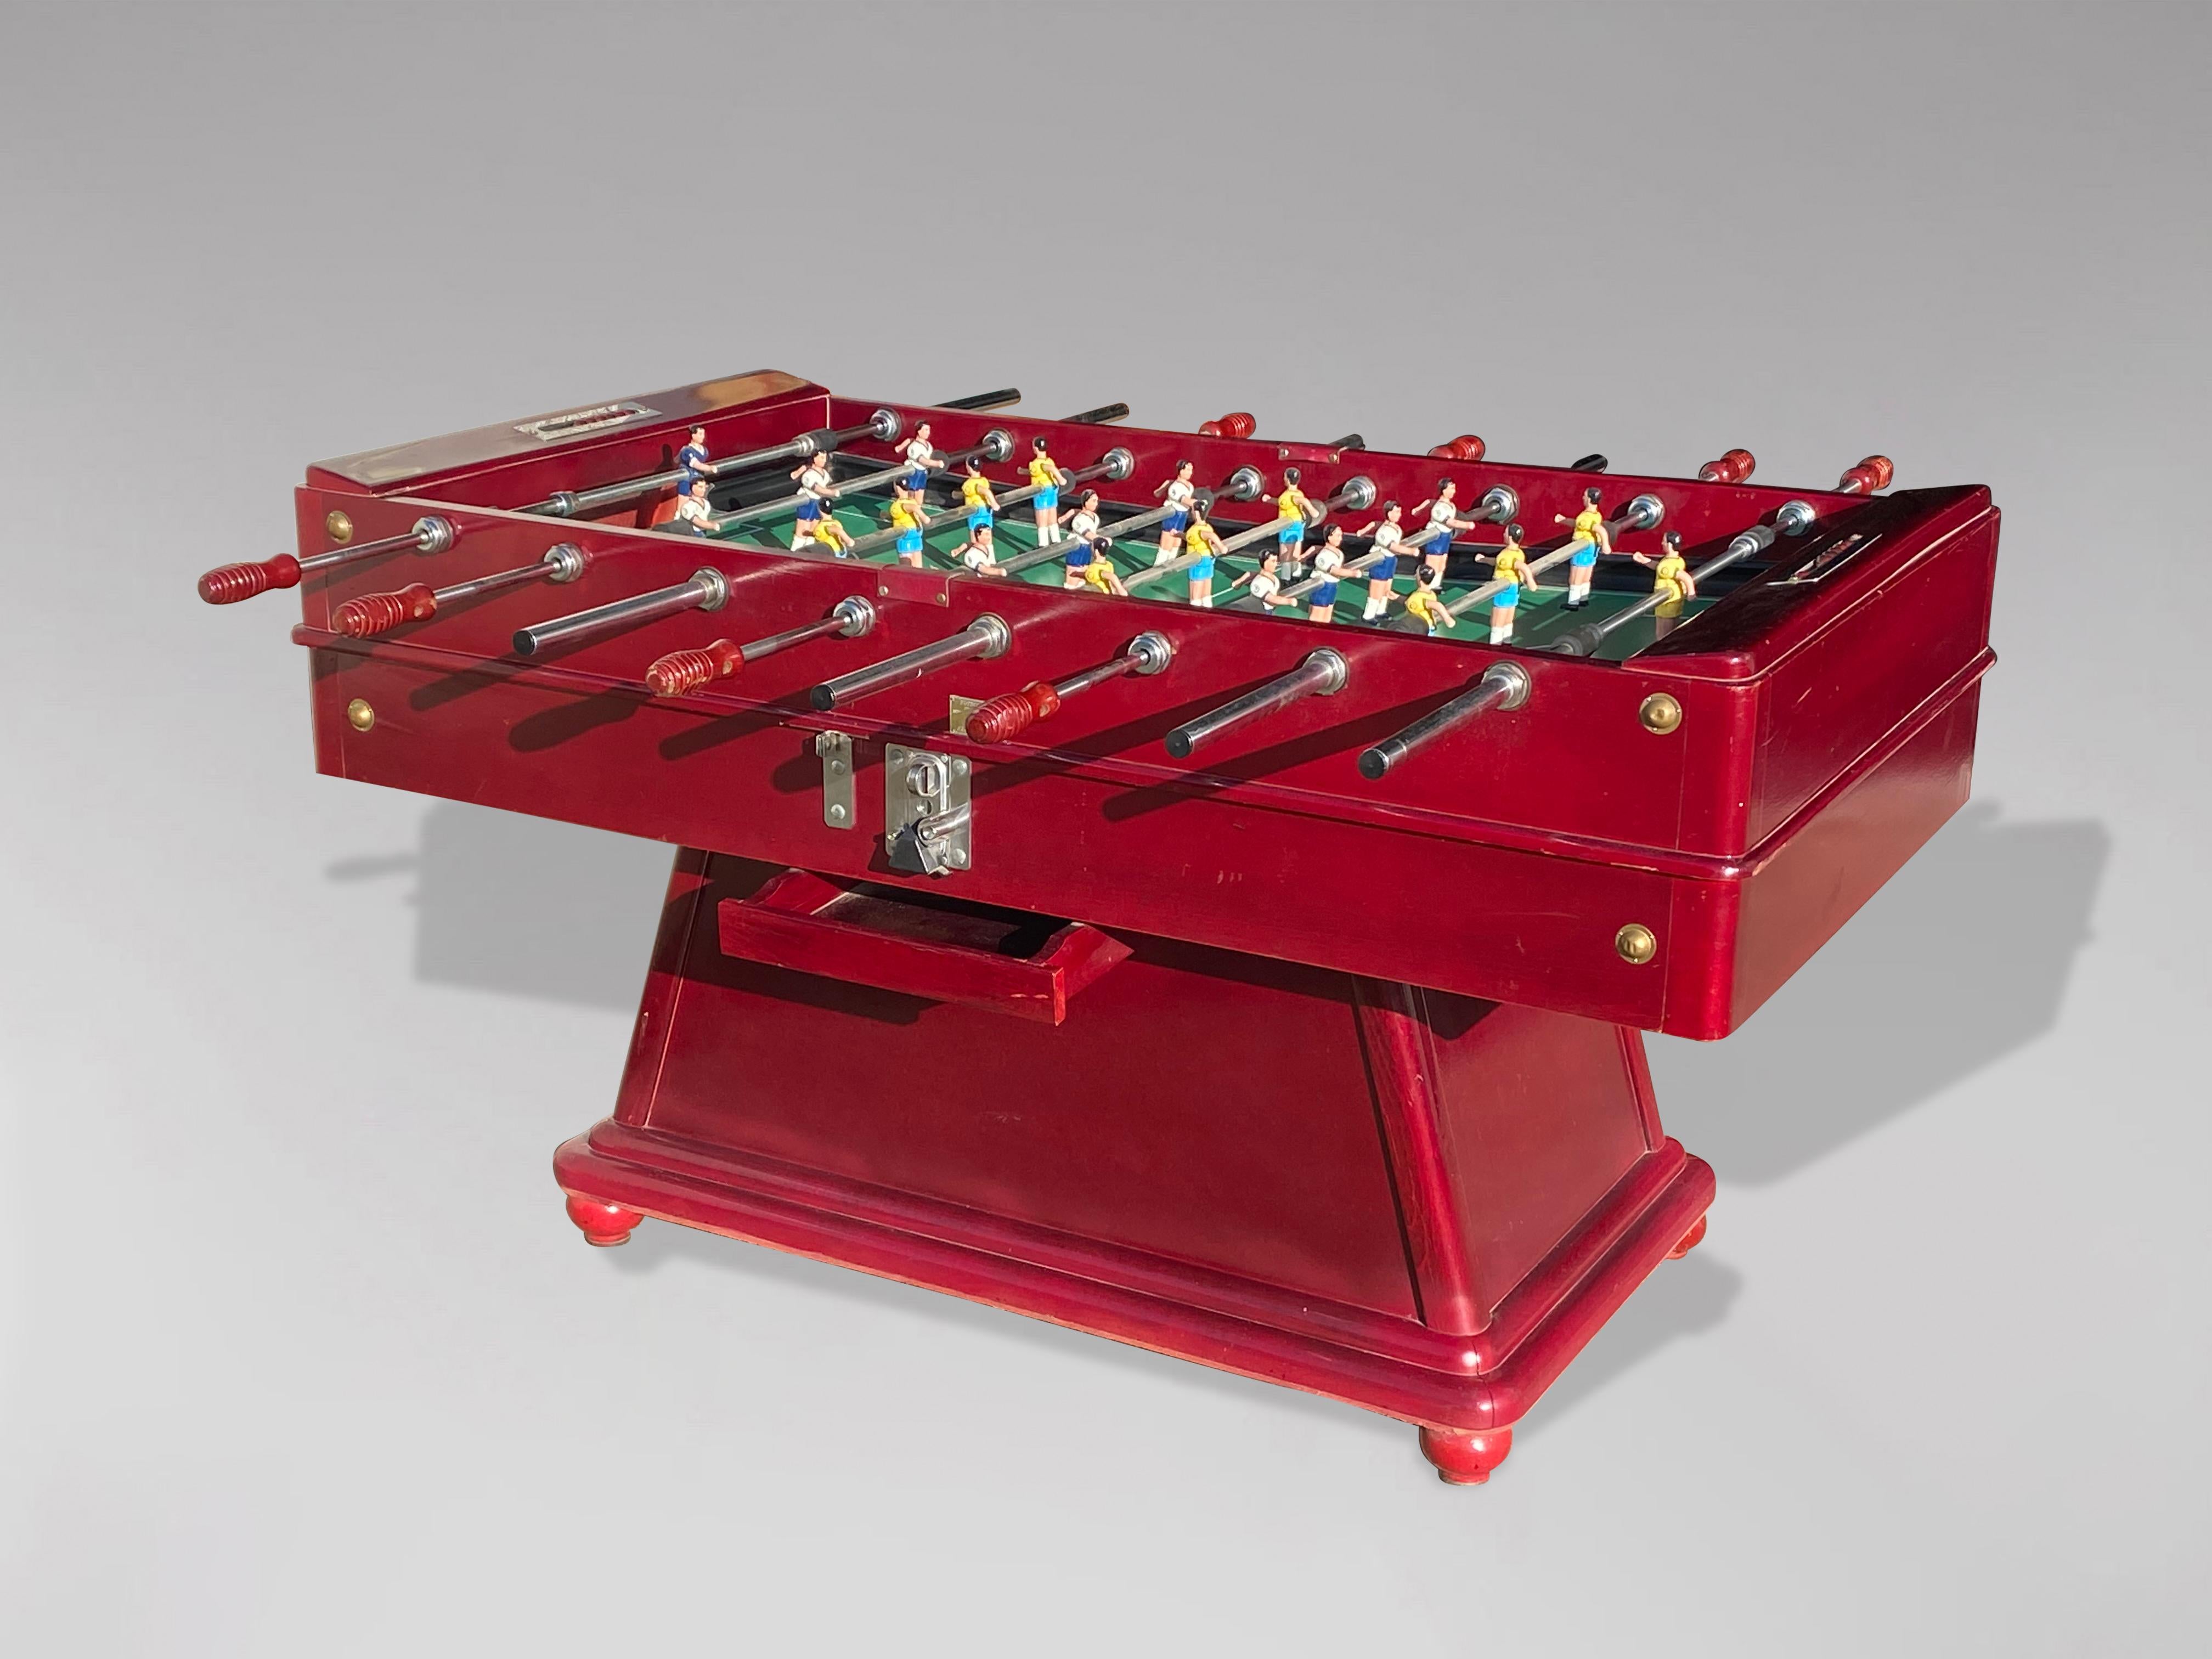 A fantastic original red cherry lacquer painted solid wood framed Spanish football table from a bar or café. Comes complete with painted metal players, an abacus-type scoring system and a set of footballs. Two of the best features of this